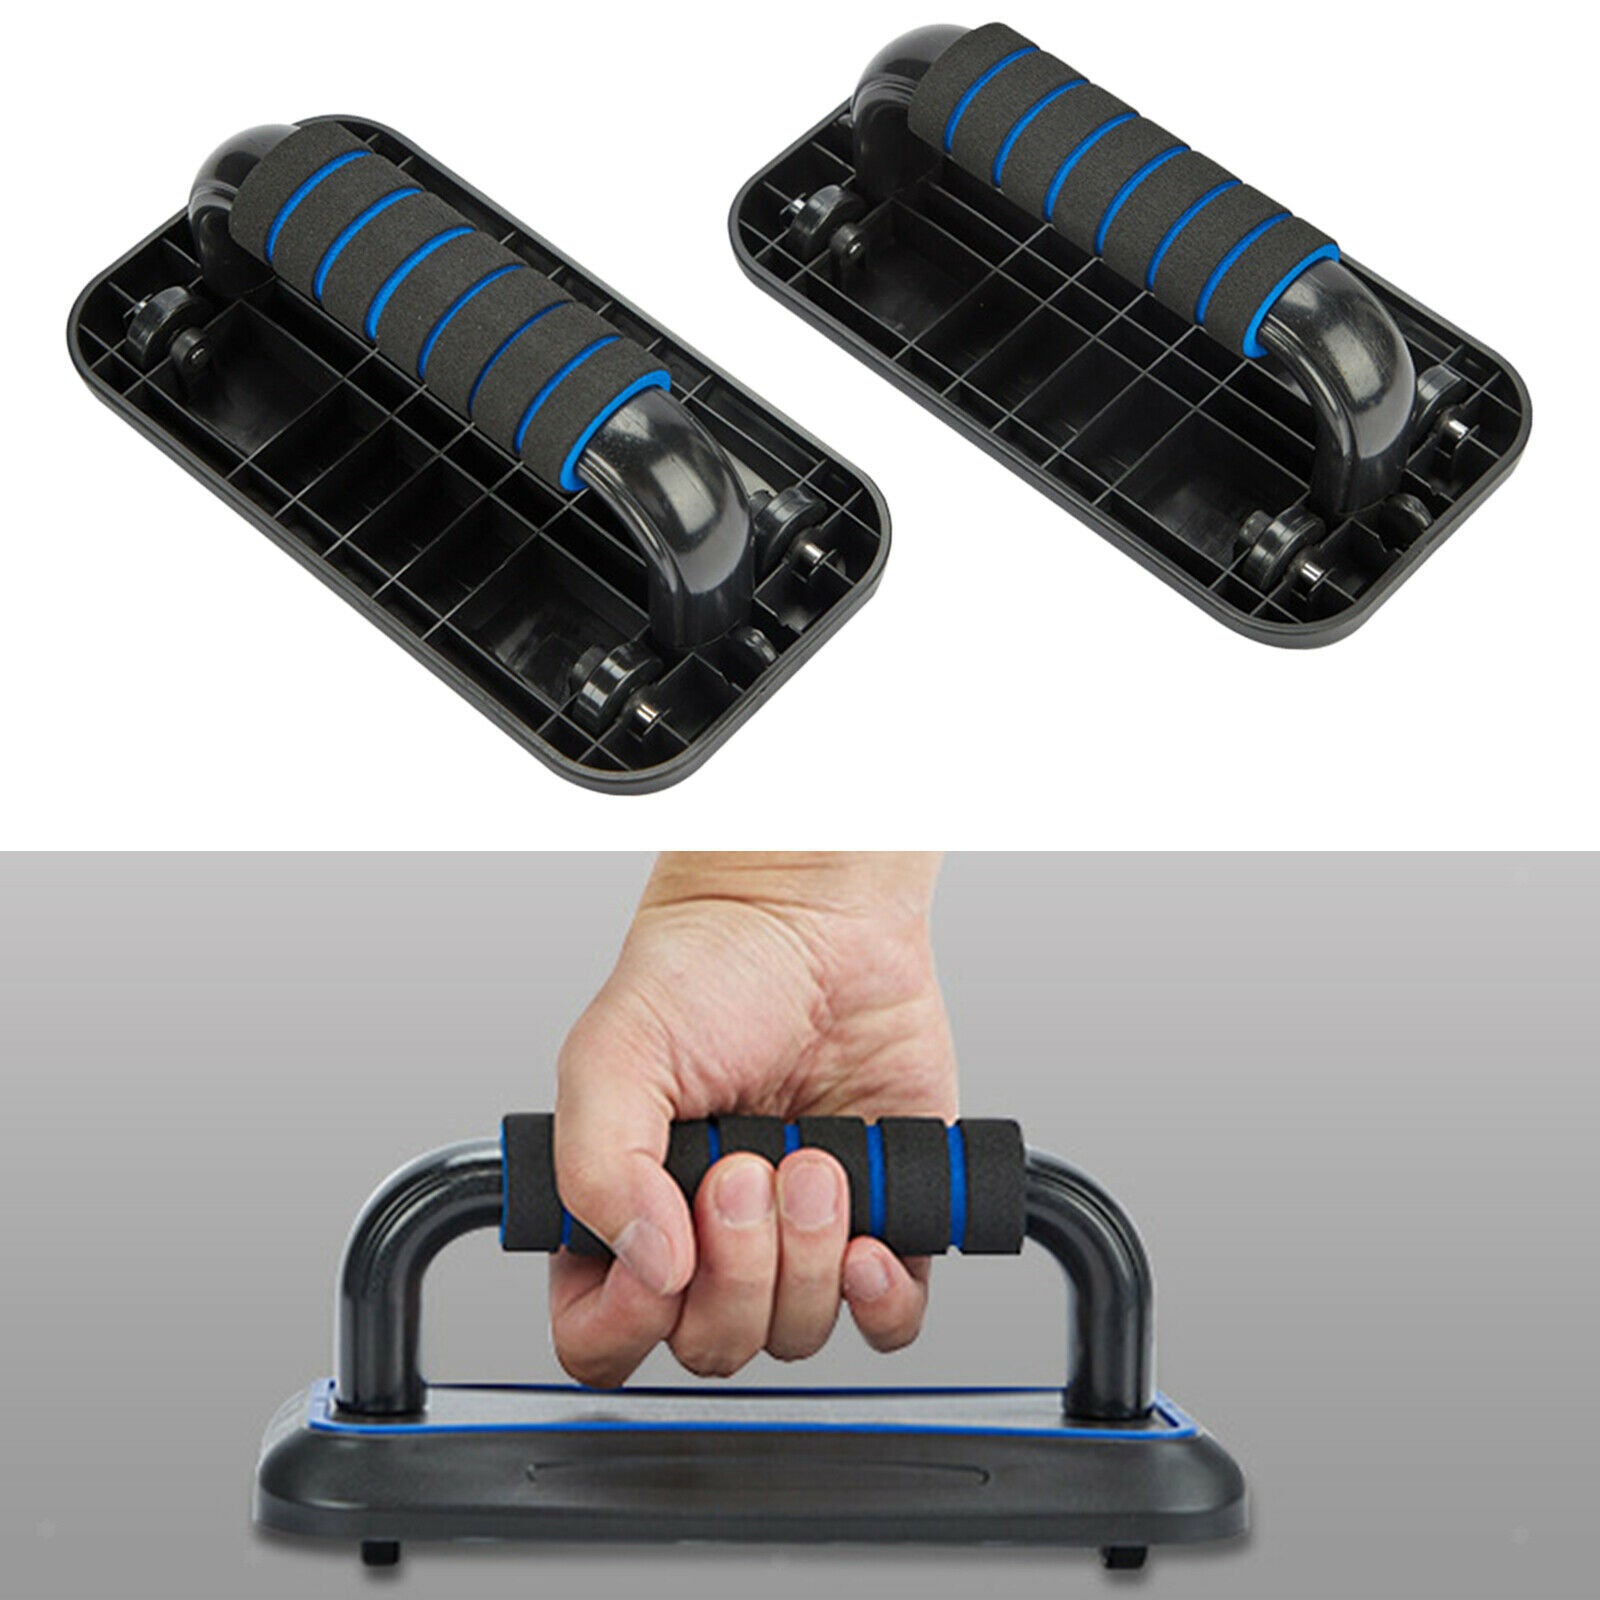 Push Up Bars Foam Grip Handles Press Pull Up Stand Home Exercise Workout Gym